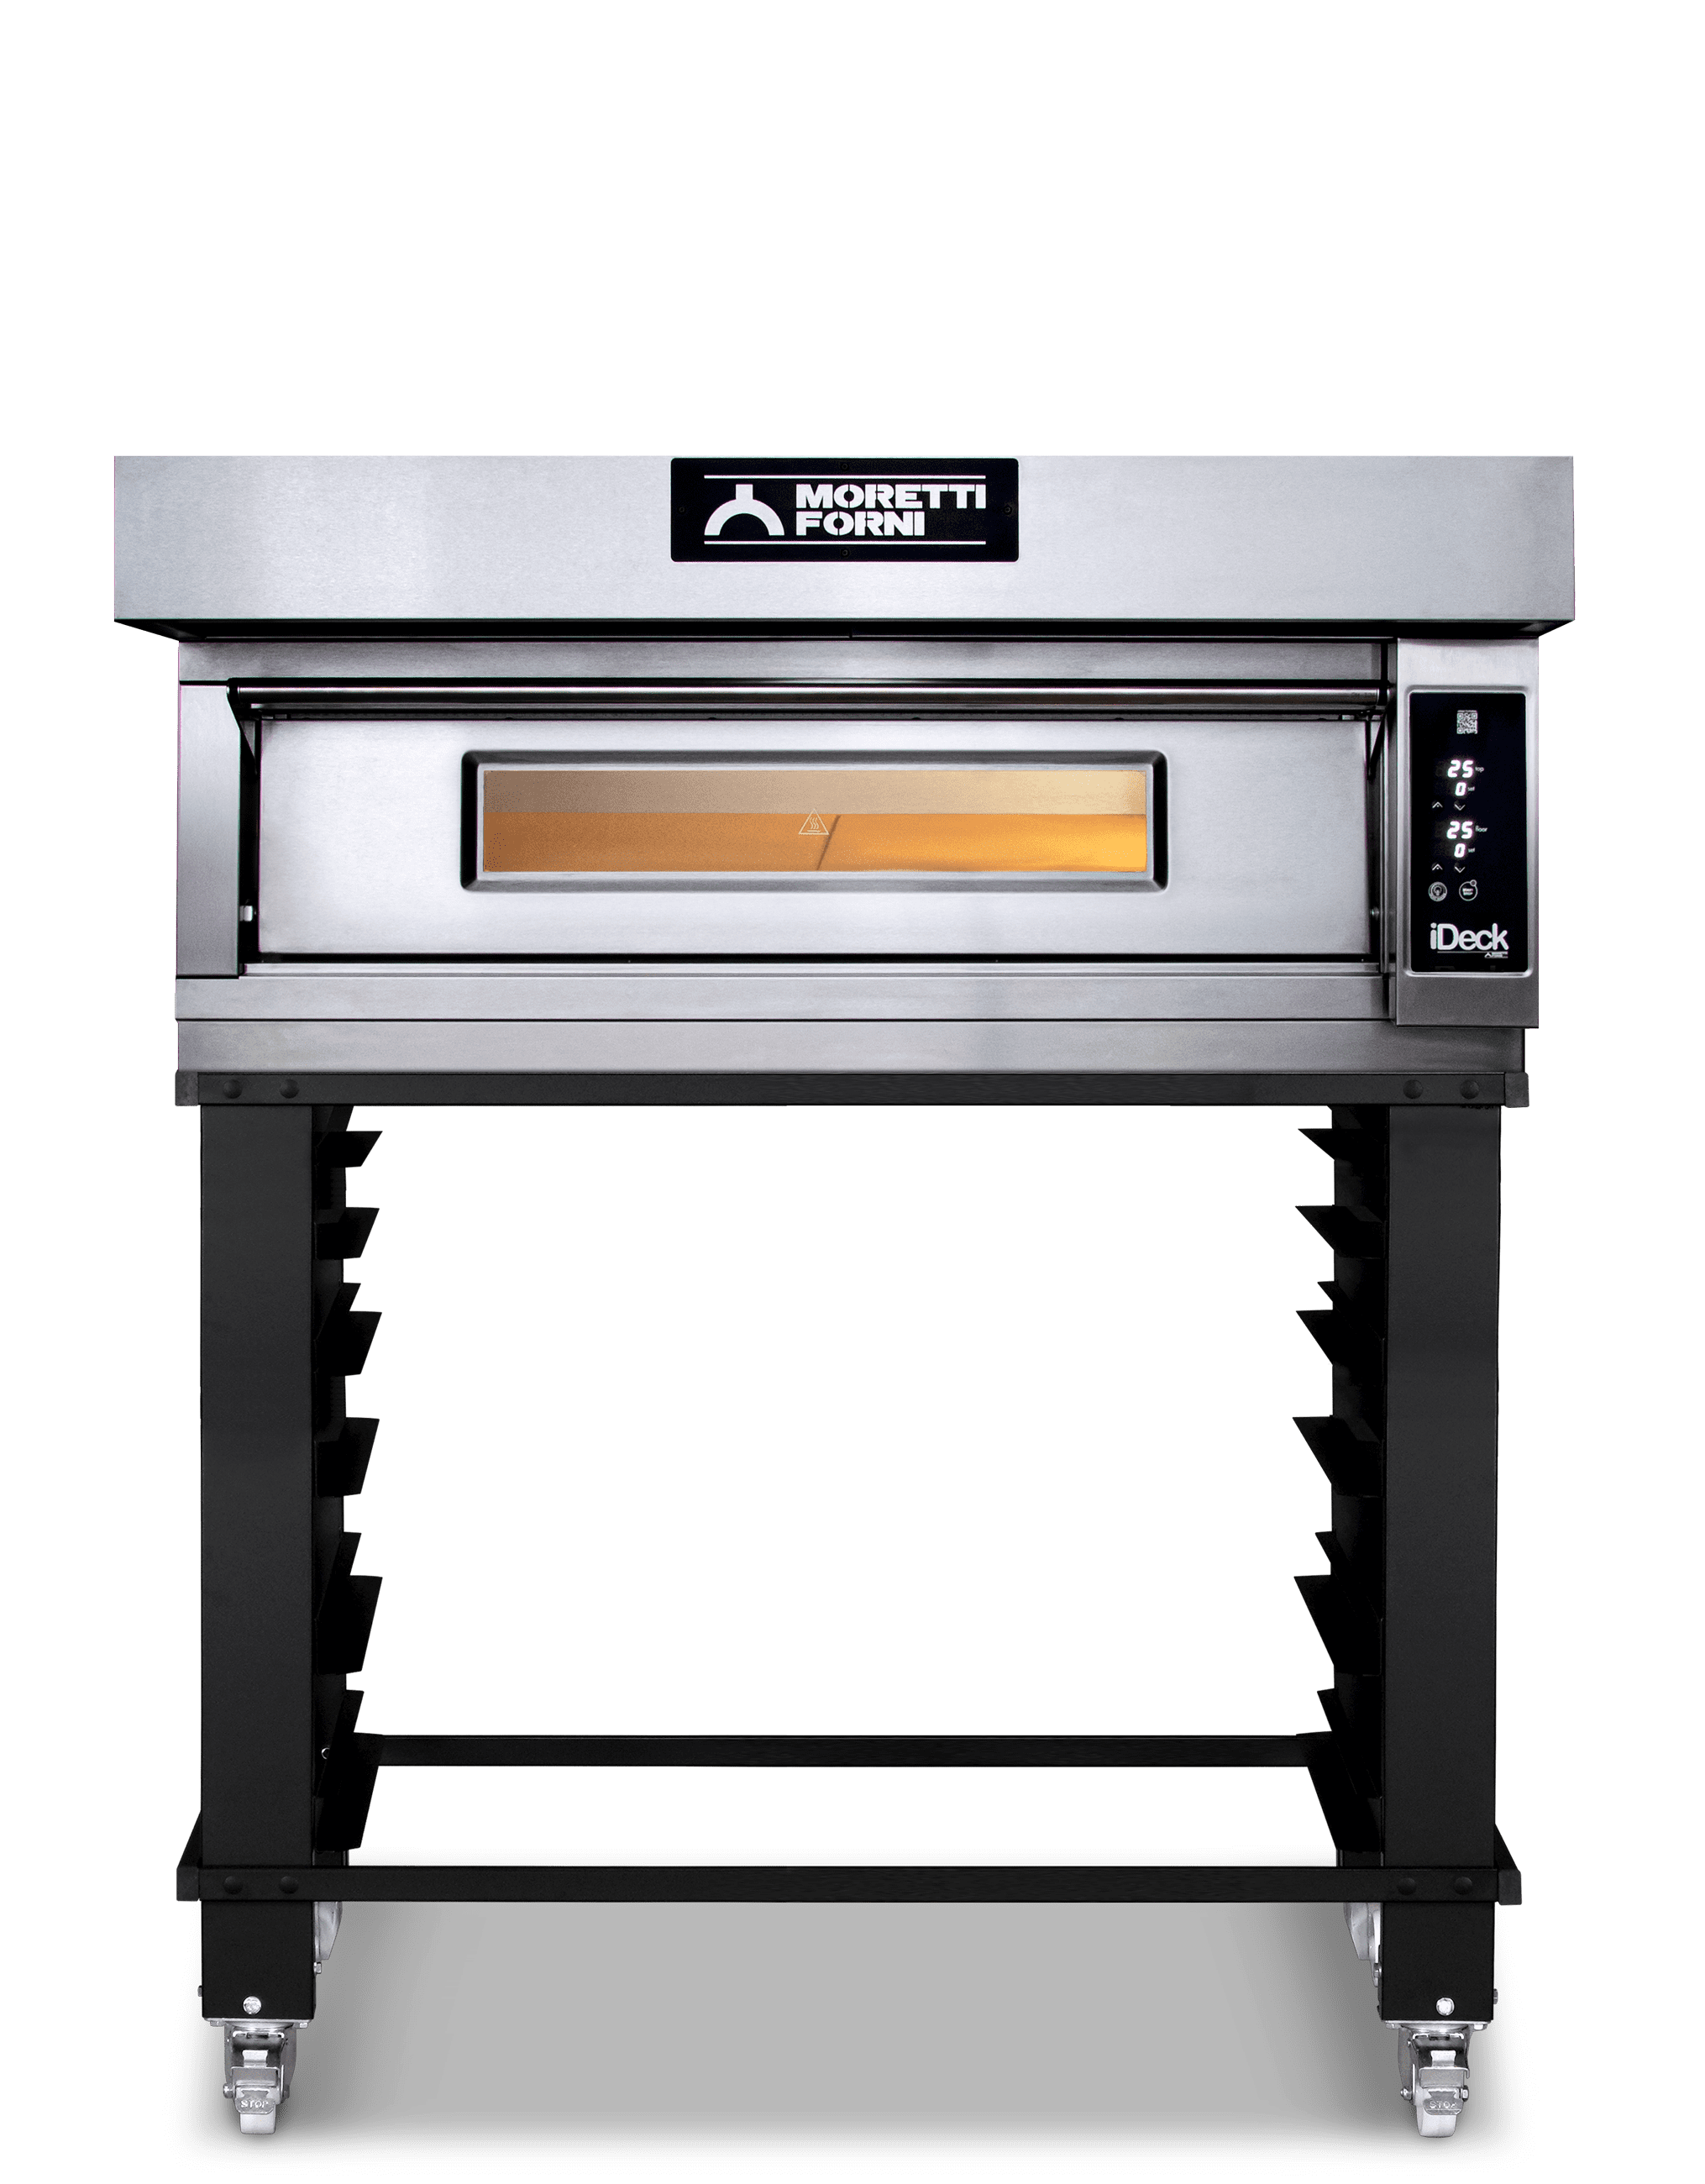 ID-M 105.105 iDeck electronic Control Electric Pizza Oven 41"W x 41"D chamber. 1 Deck